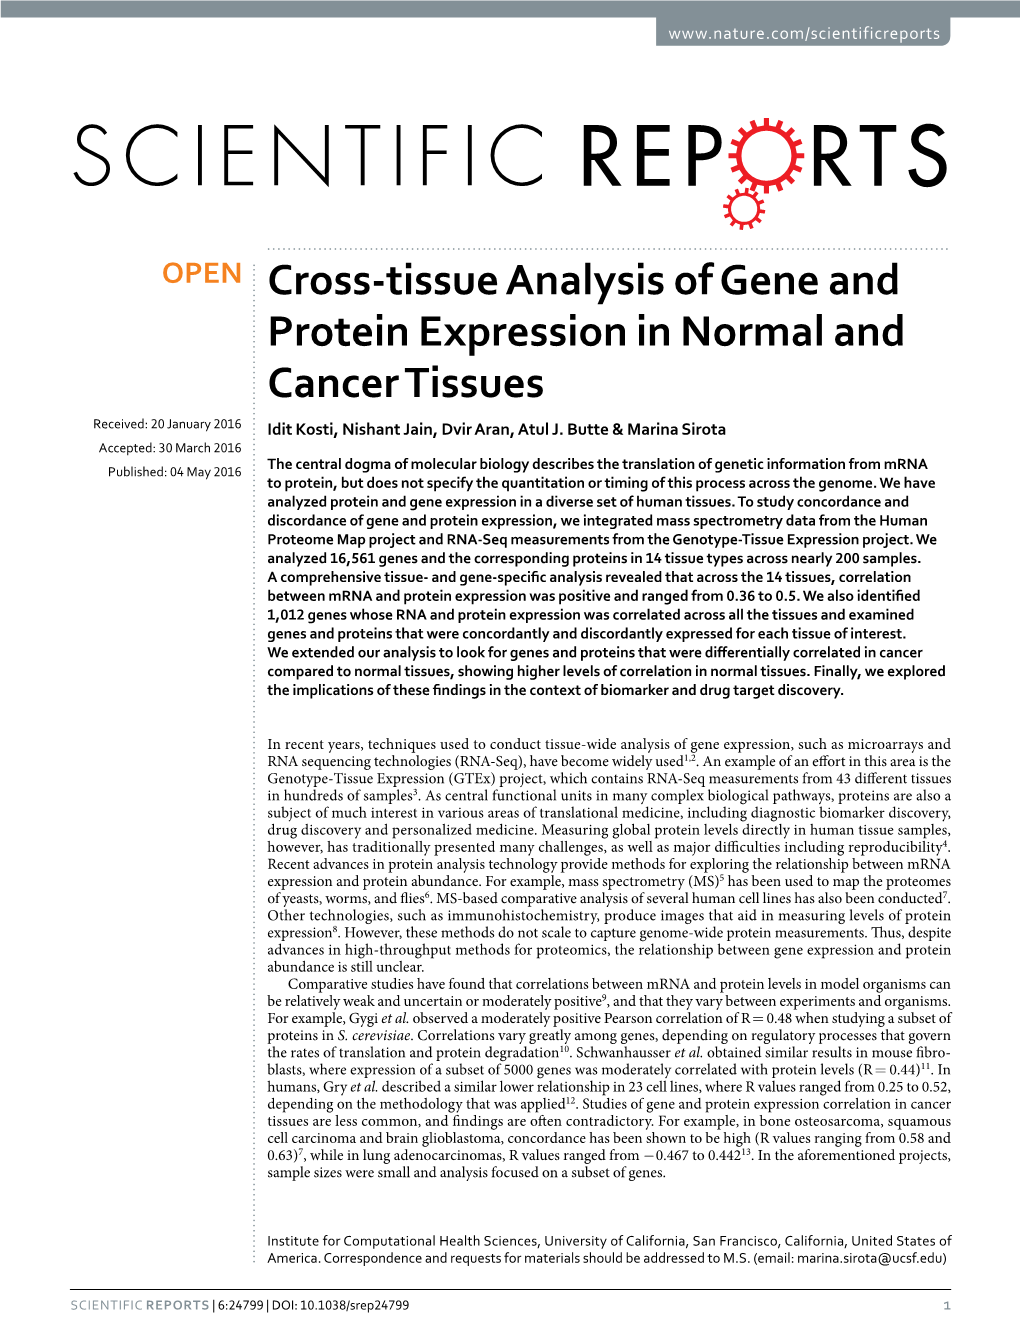 Cross-Tissue Analysis of Gene and Protein Expression in Normal and Cancer Tissues Received: 20 January 2016 Idit Kosti, Nishant Jain, Dvir Aran, Atul J